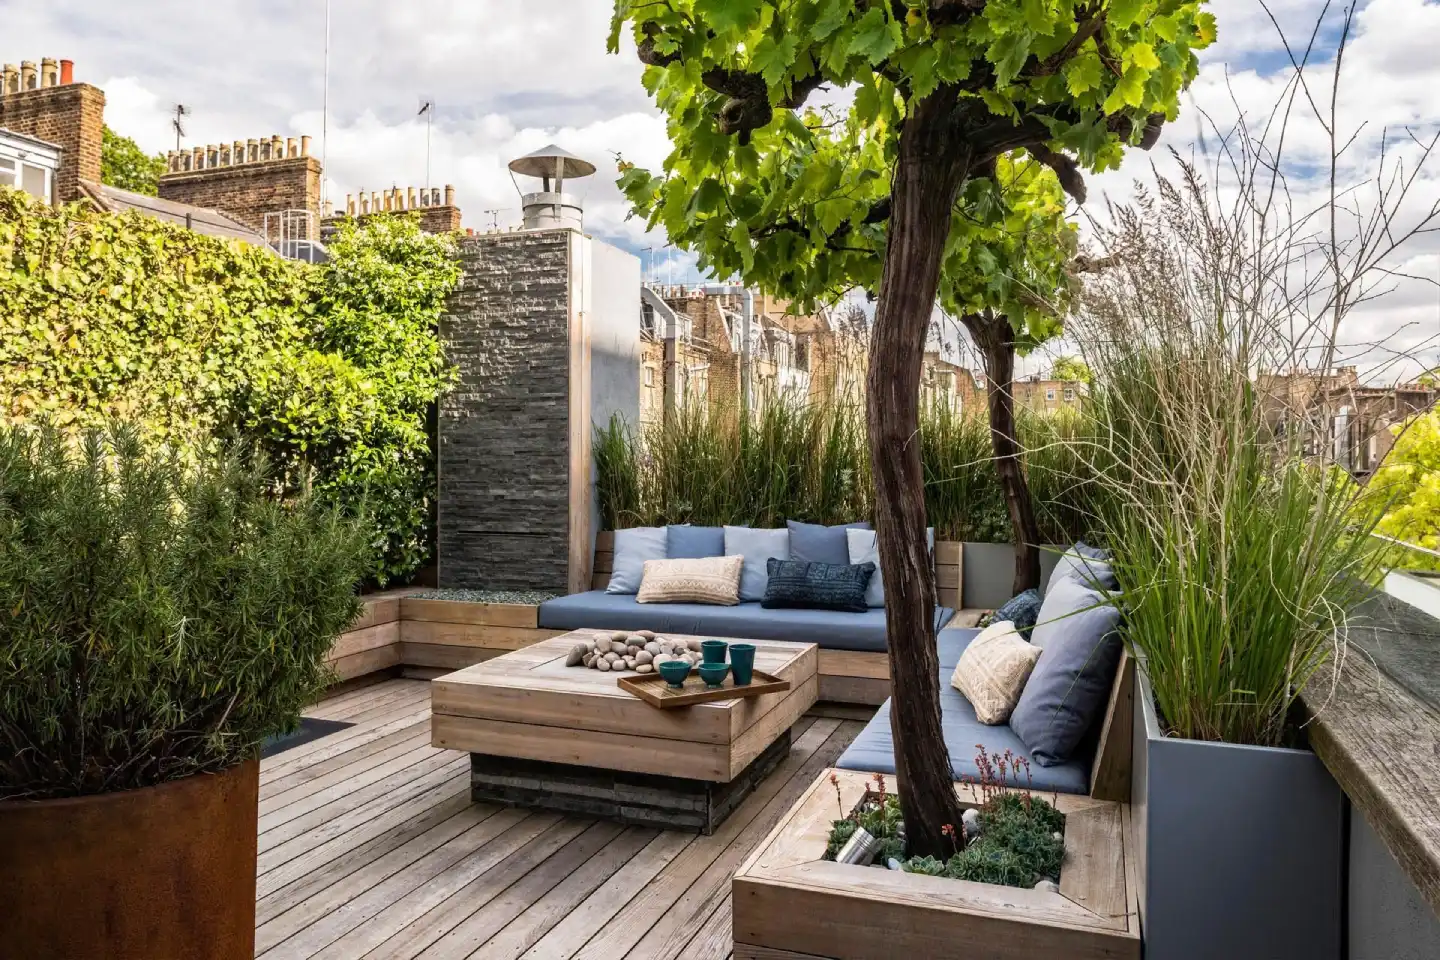 Small roof garden design pictures